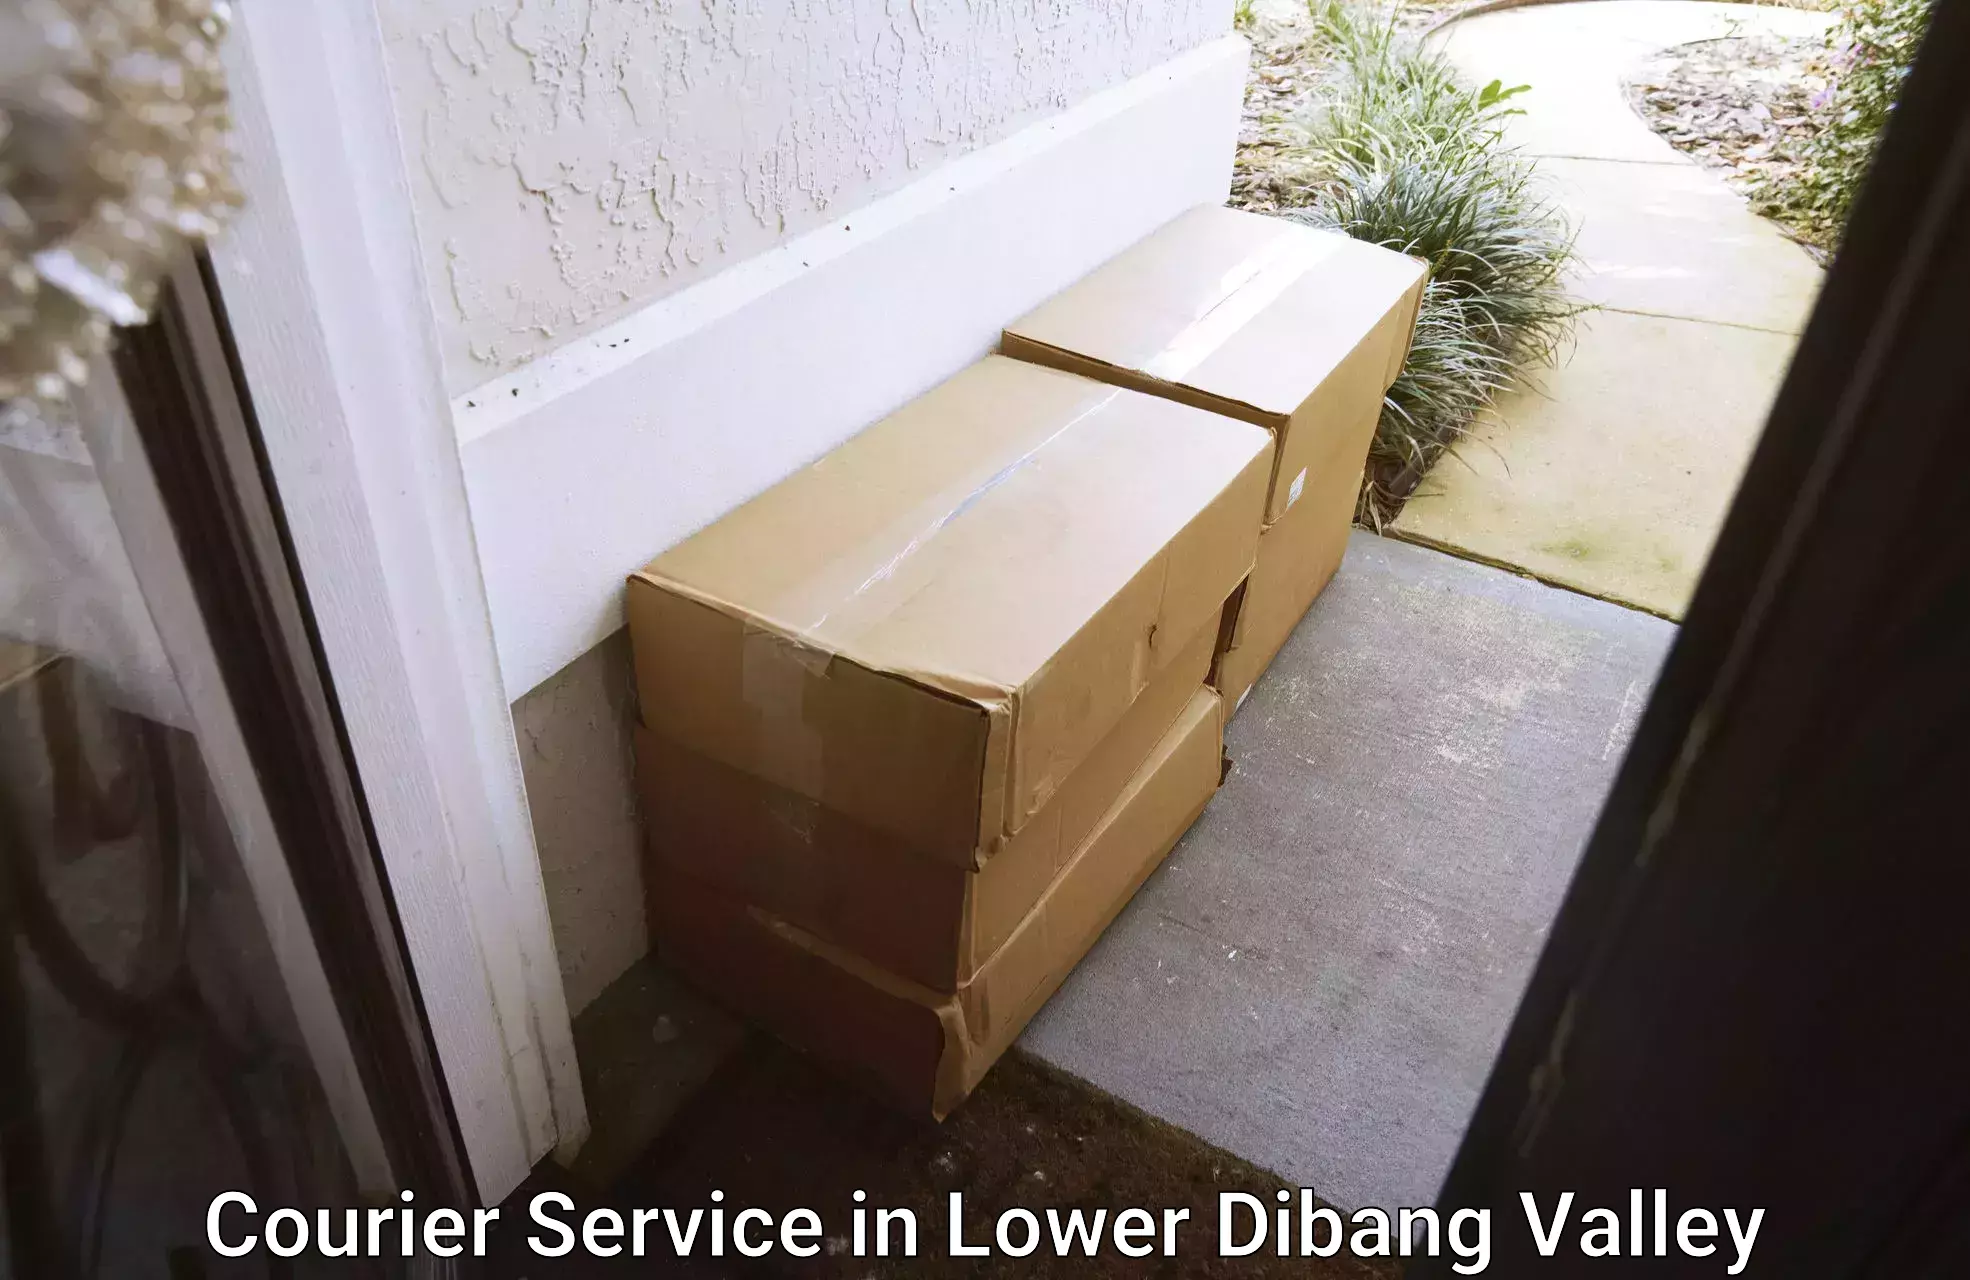 Customer-oriented courier services in Lower Dibang Valley